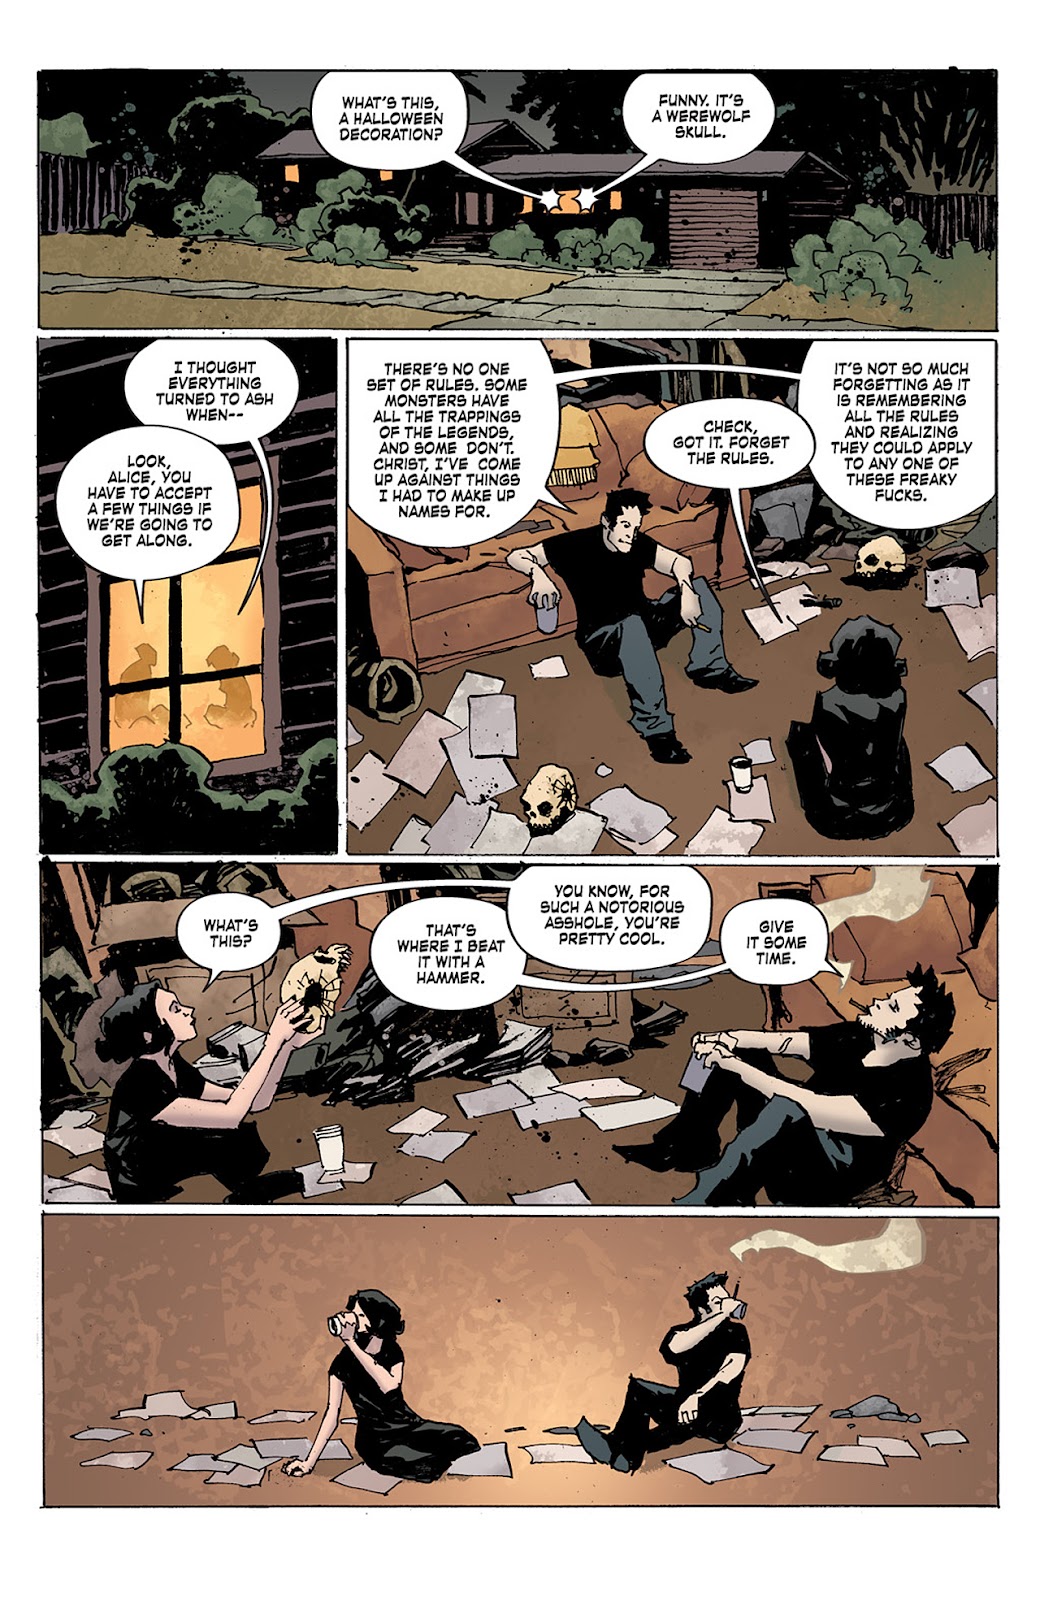 Criminal Macabre: Final Night - The 30 Days of Night Crossover issue 2 - Page 5